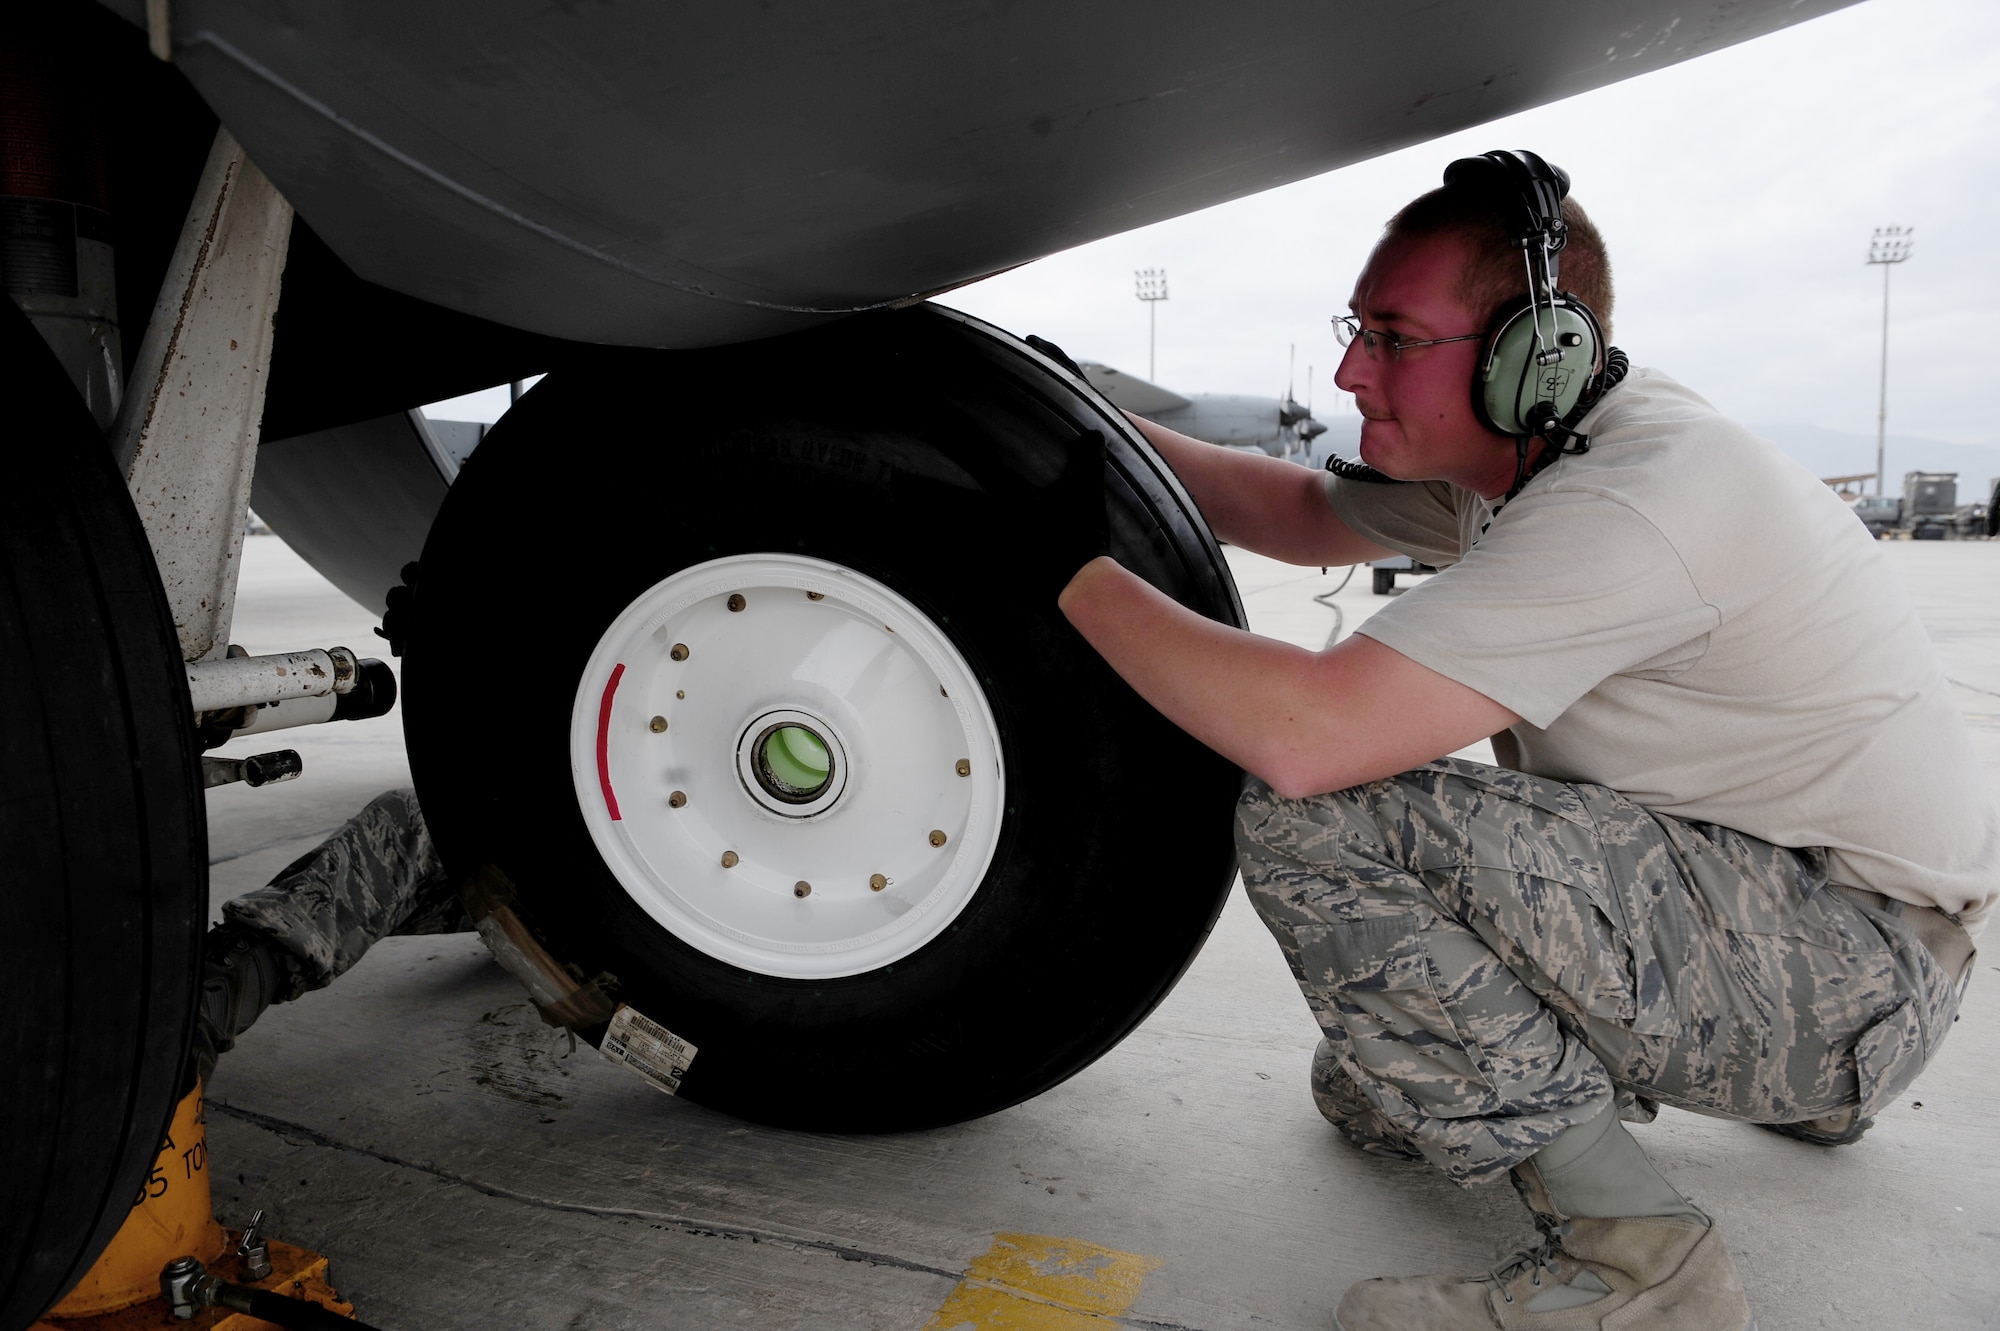 U.S. Air Force Staff Sgt. John Green, 455th Expeditionary Aircraft Maintenance Squadron crew chief, maneuvers a fresh tire into position during a tire change procedure on a C-130 Hercules aircraft at Bagram Airfield, Afghanistan, April 9, 2011. Green is deployed from the Delaware Air National Guard’s 166th Aircraft Maintenance Squadron, New Castle, Del., supporting Operation Enduring Freedom. (U.S. Air Force photo/Master Sgt. William Greer)